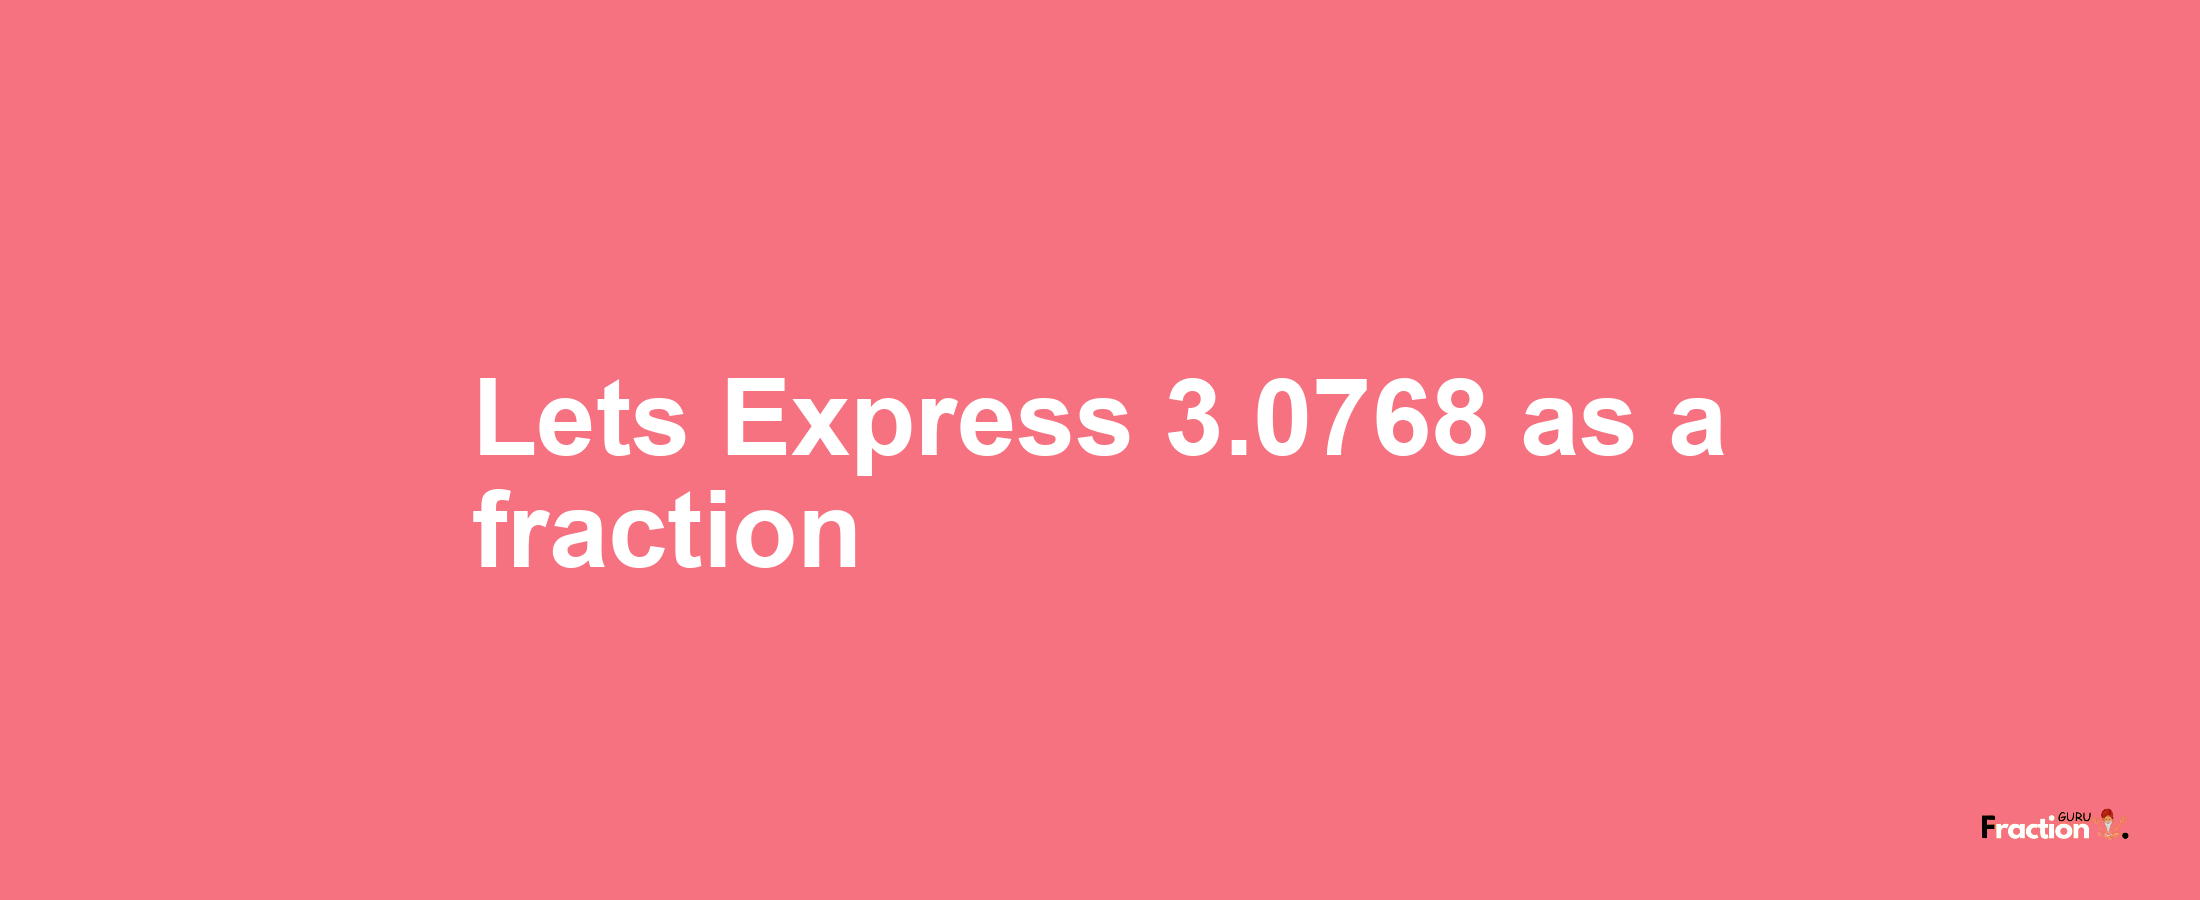 Lets Express 3.0768 as afraction